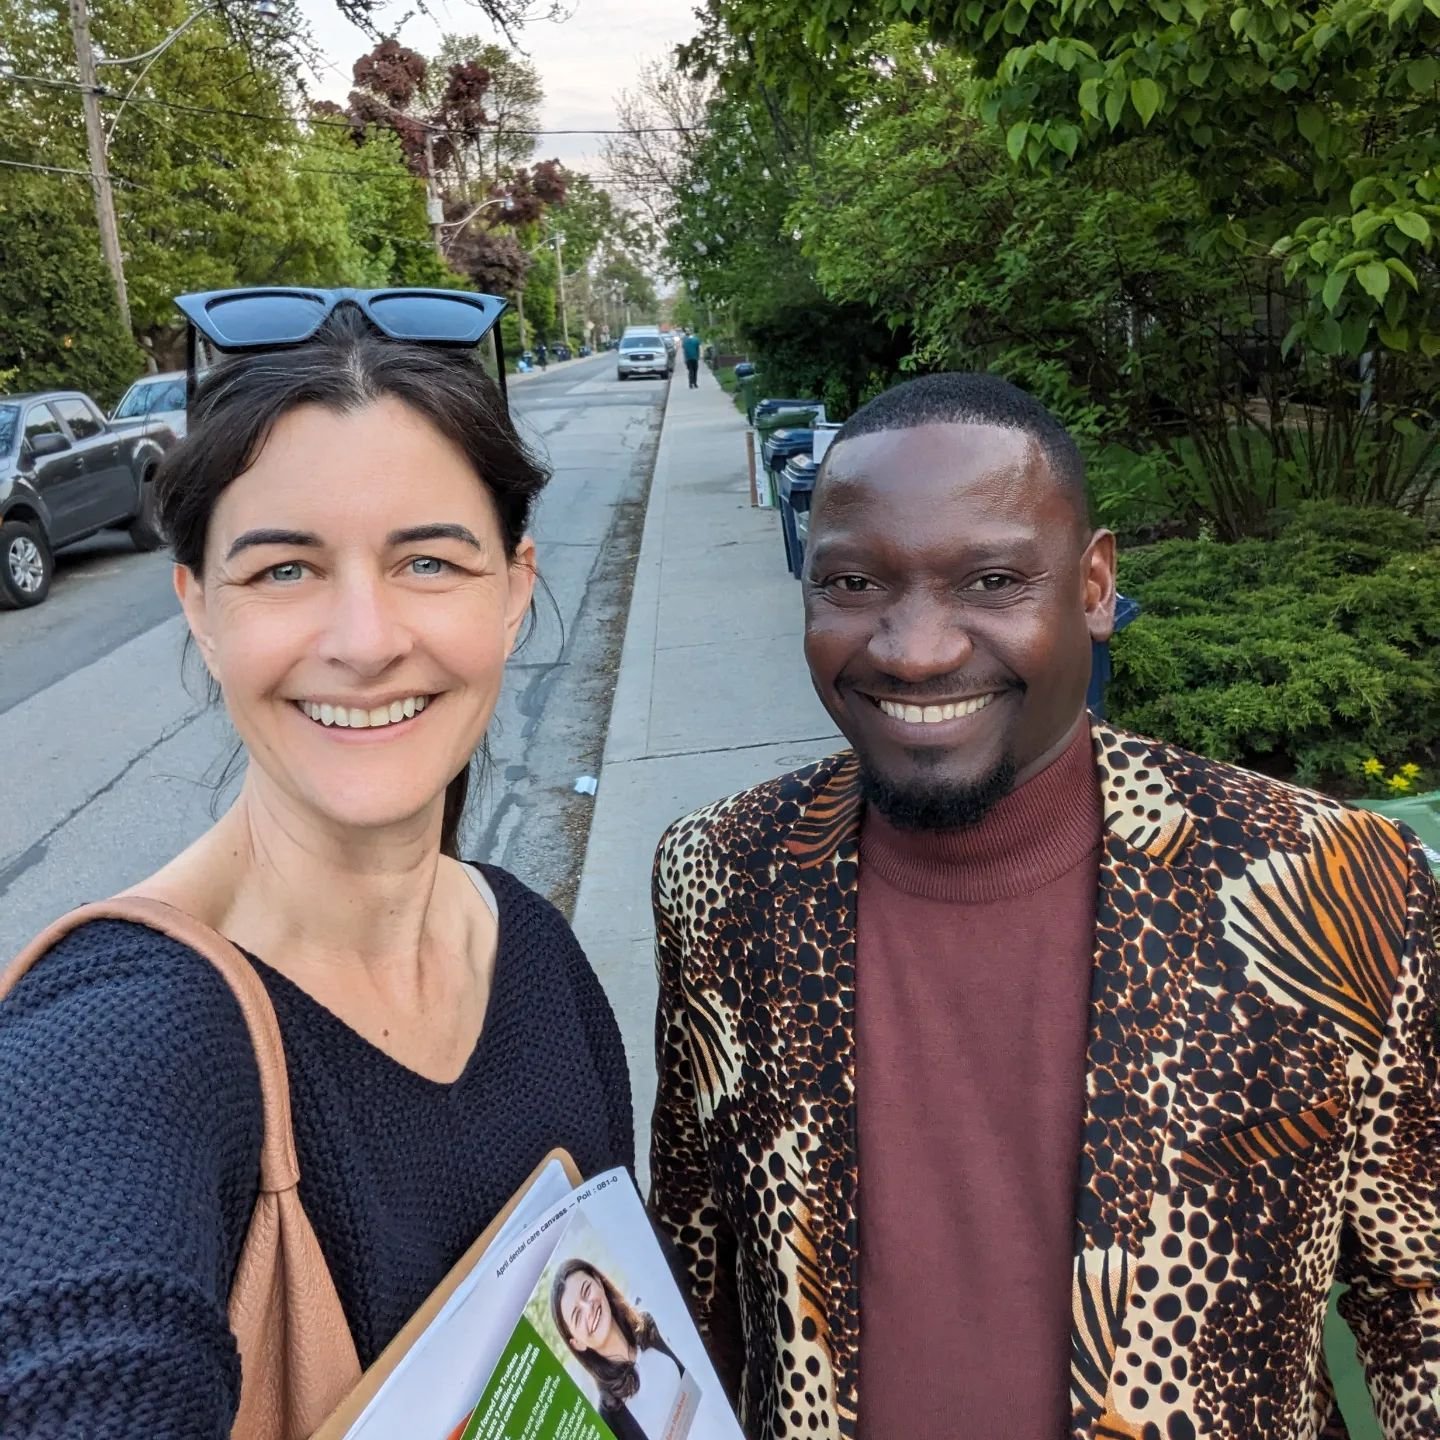 Another warm evening canvassing #TorDan with my friend Dennis! Join us next time at the link in bio